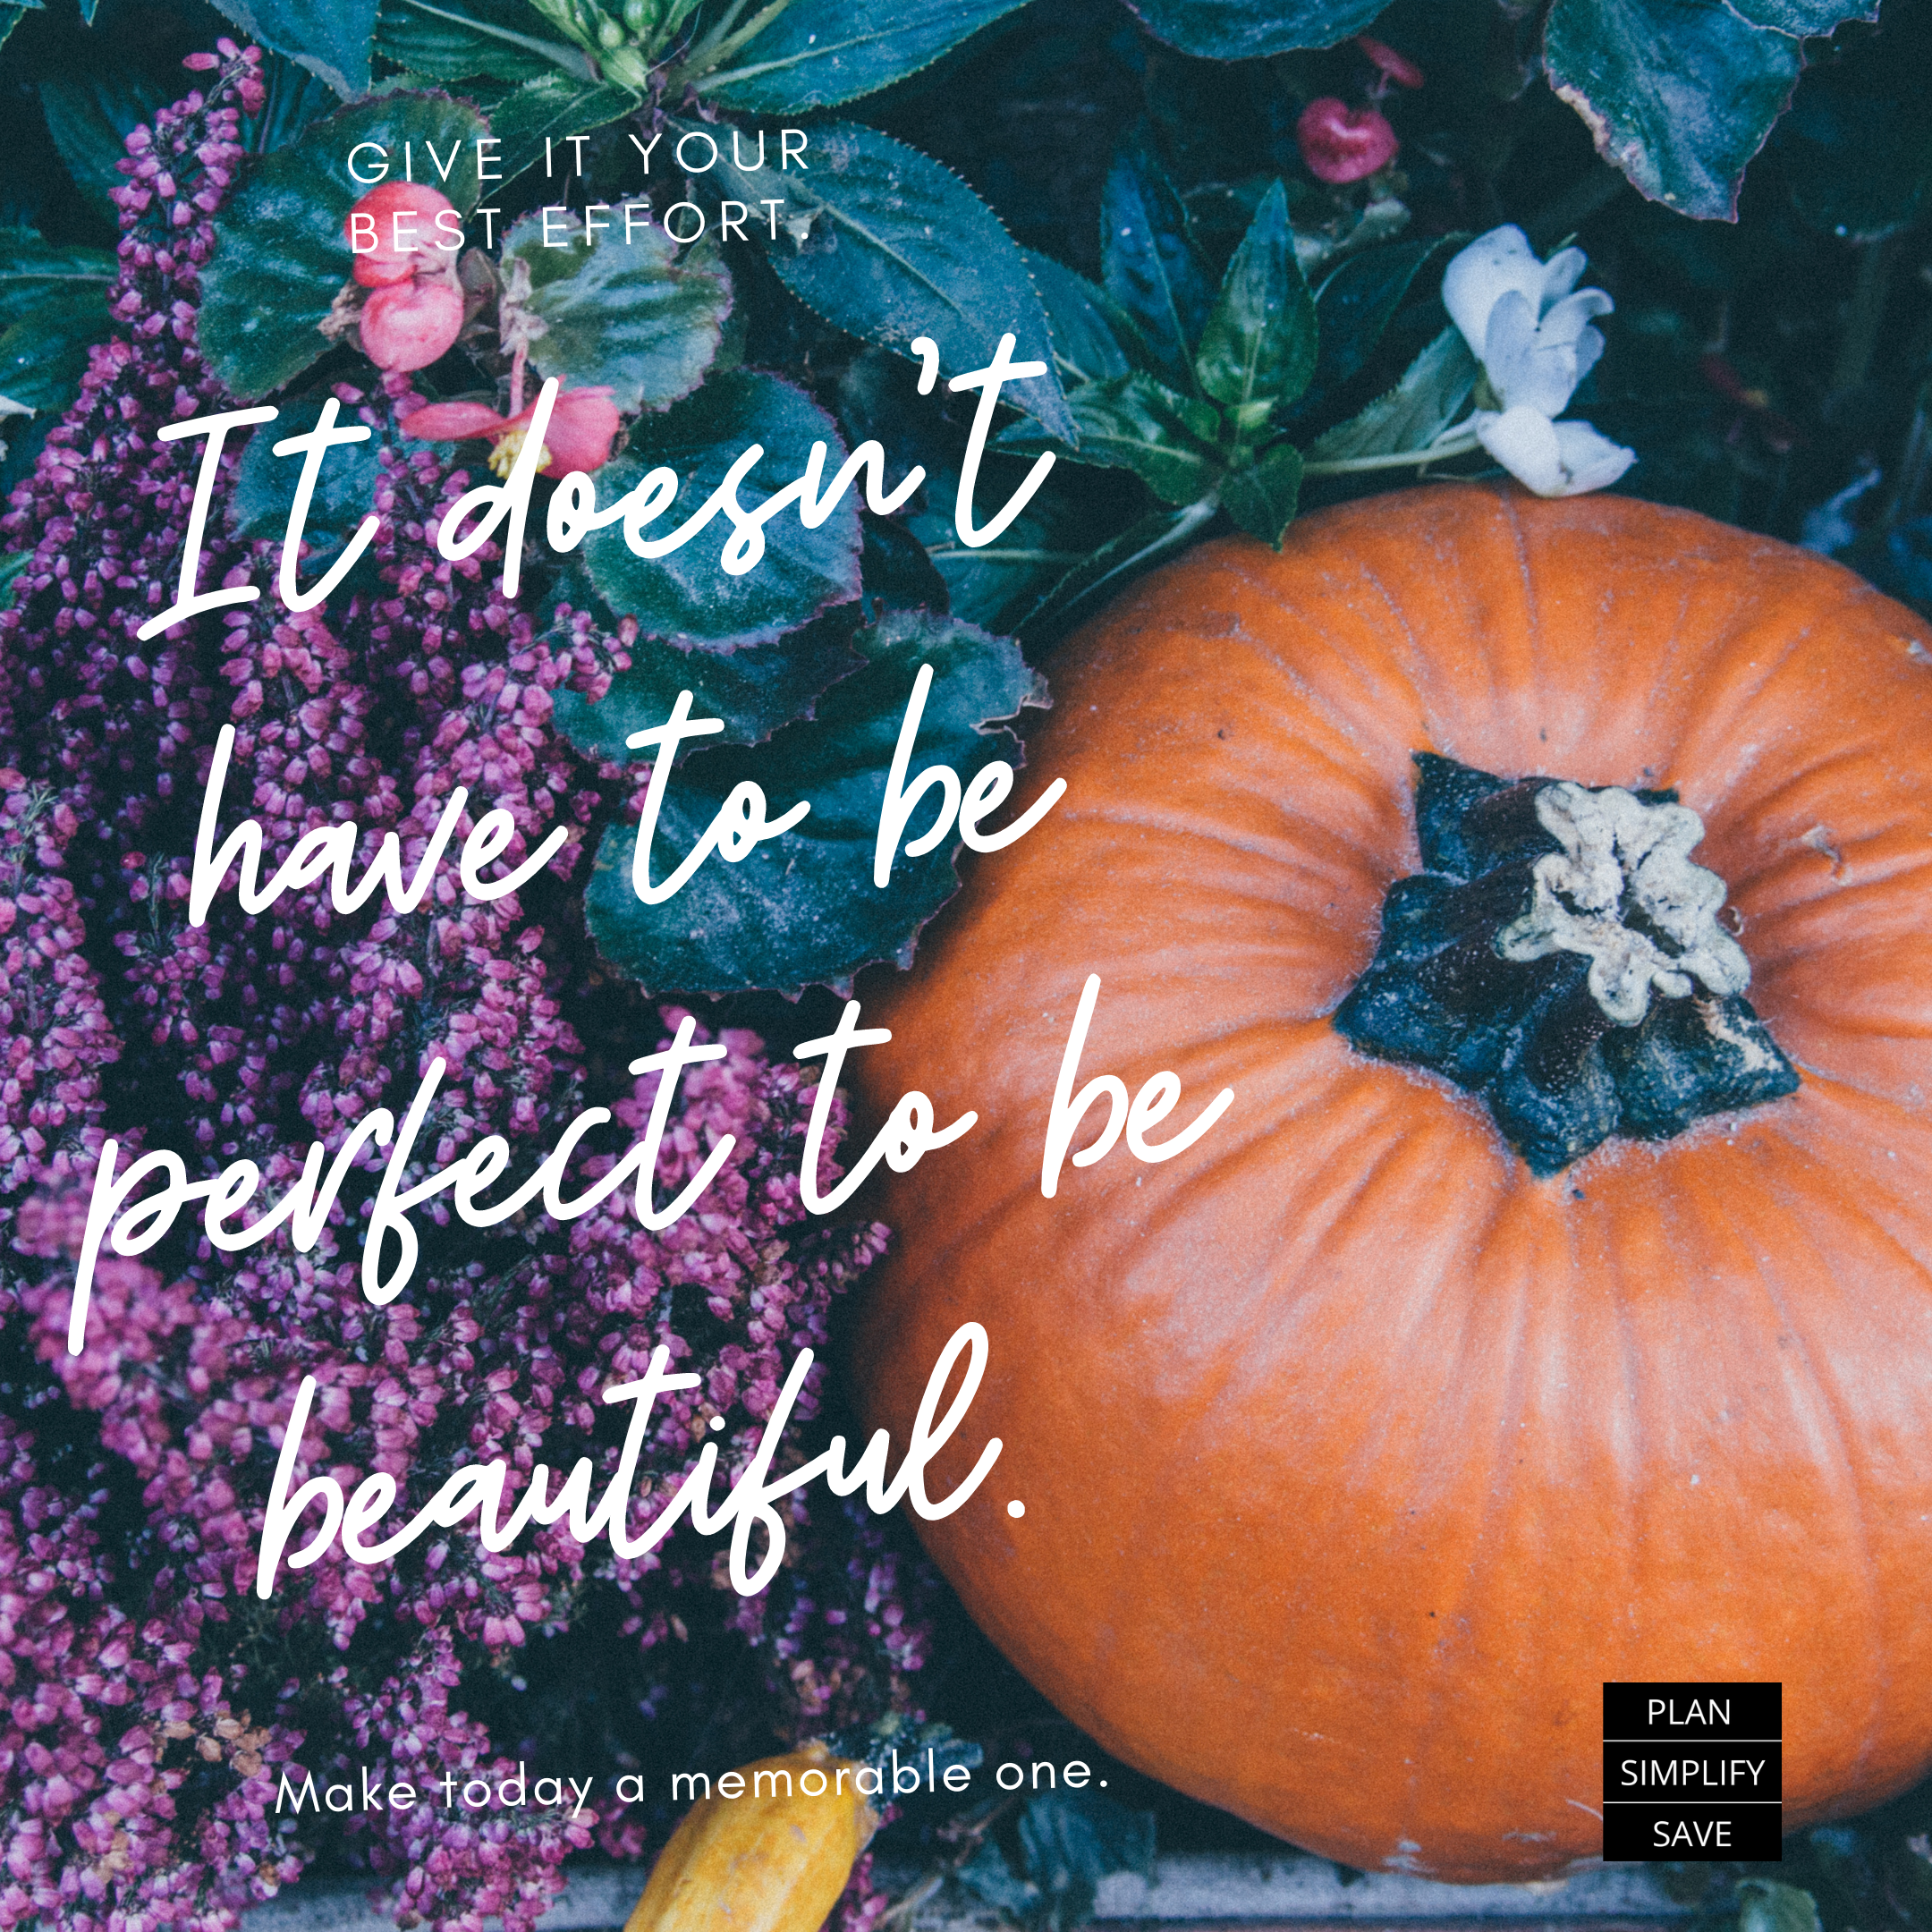 Beautiful is not perfect.